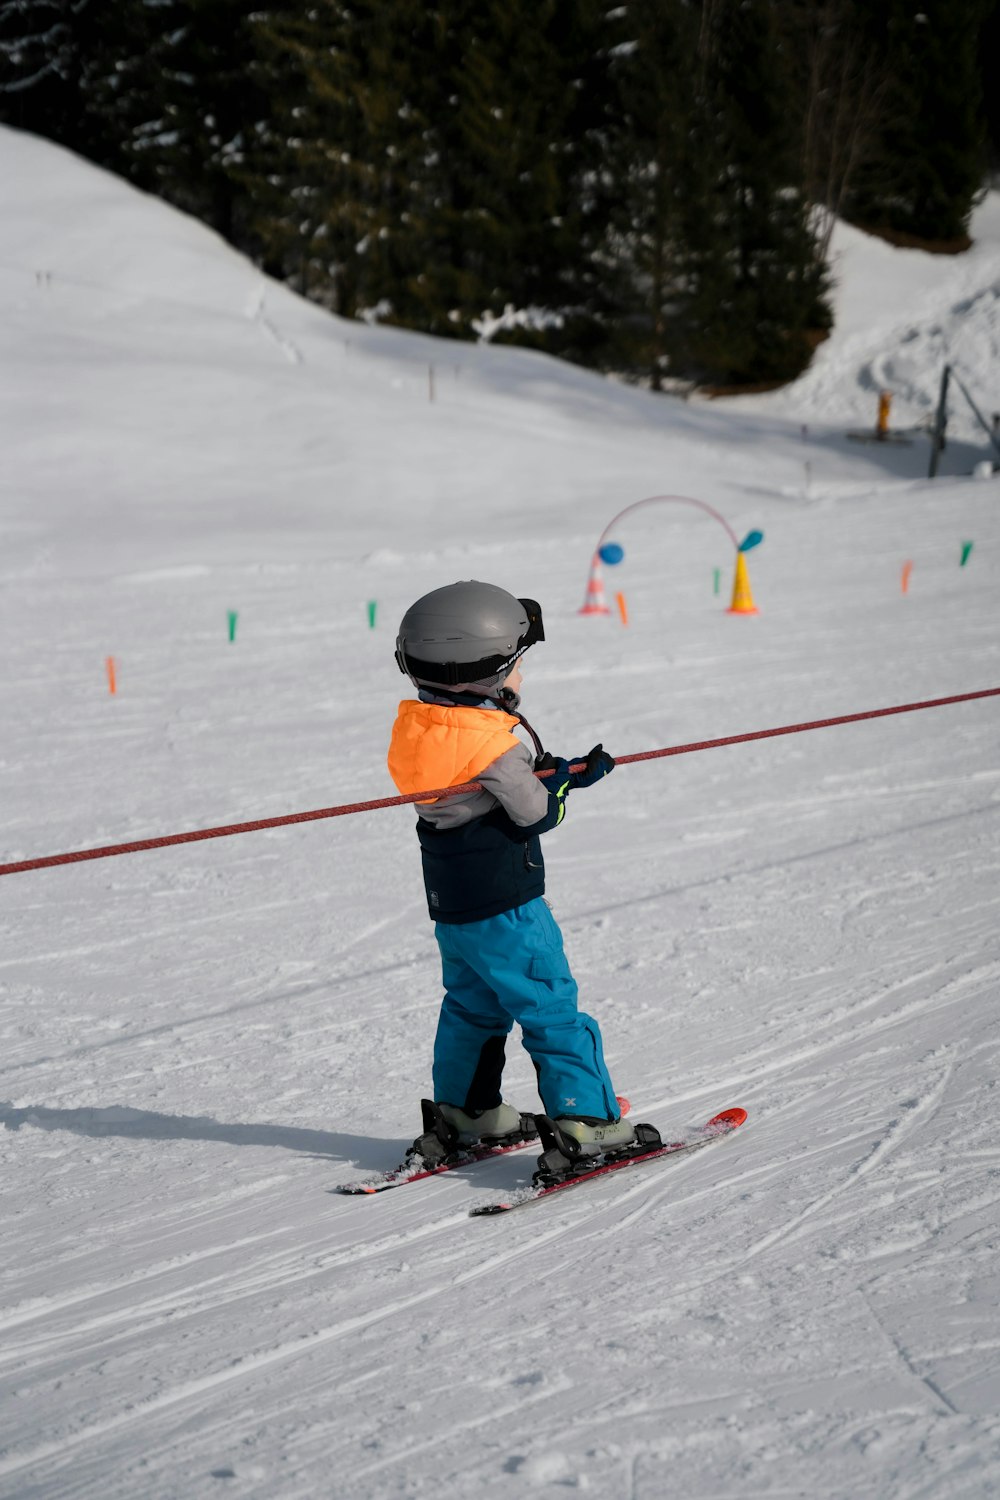 a little boy riding skis down a snow covered slope